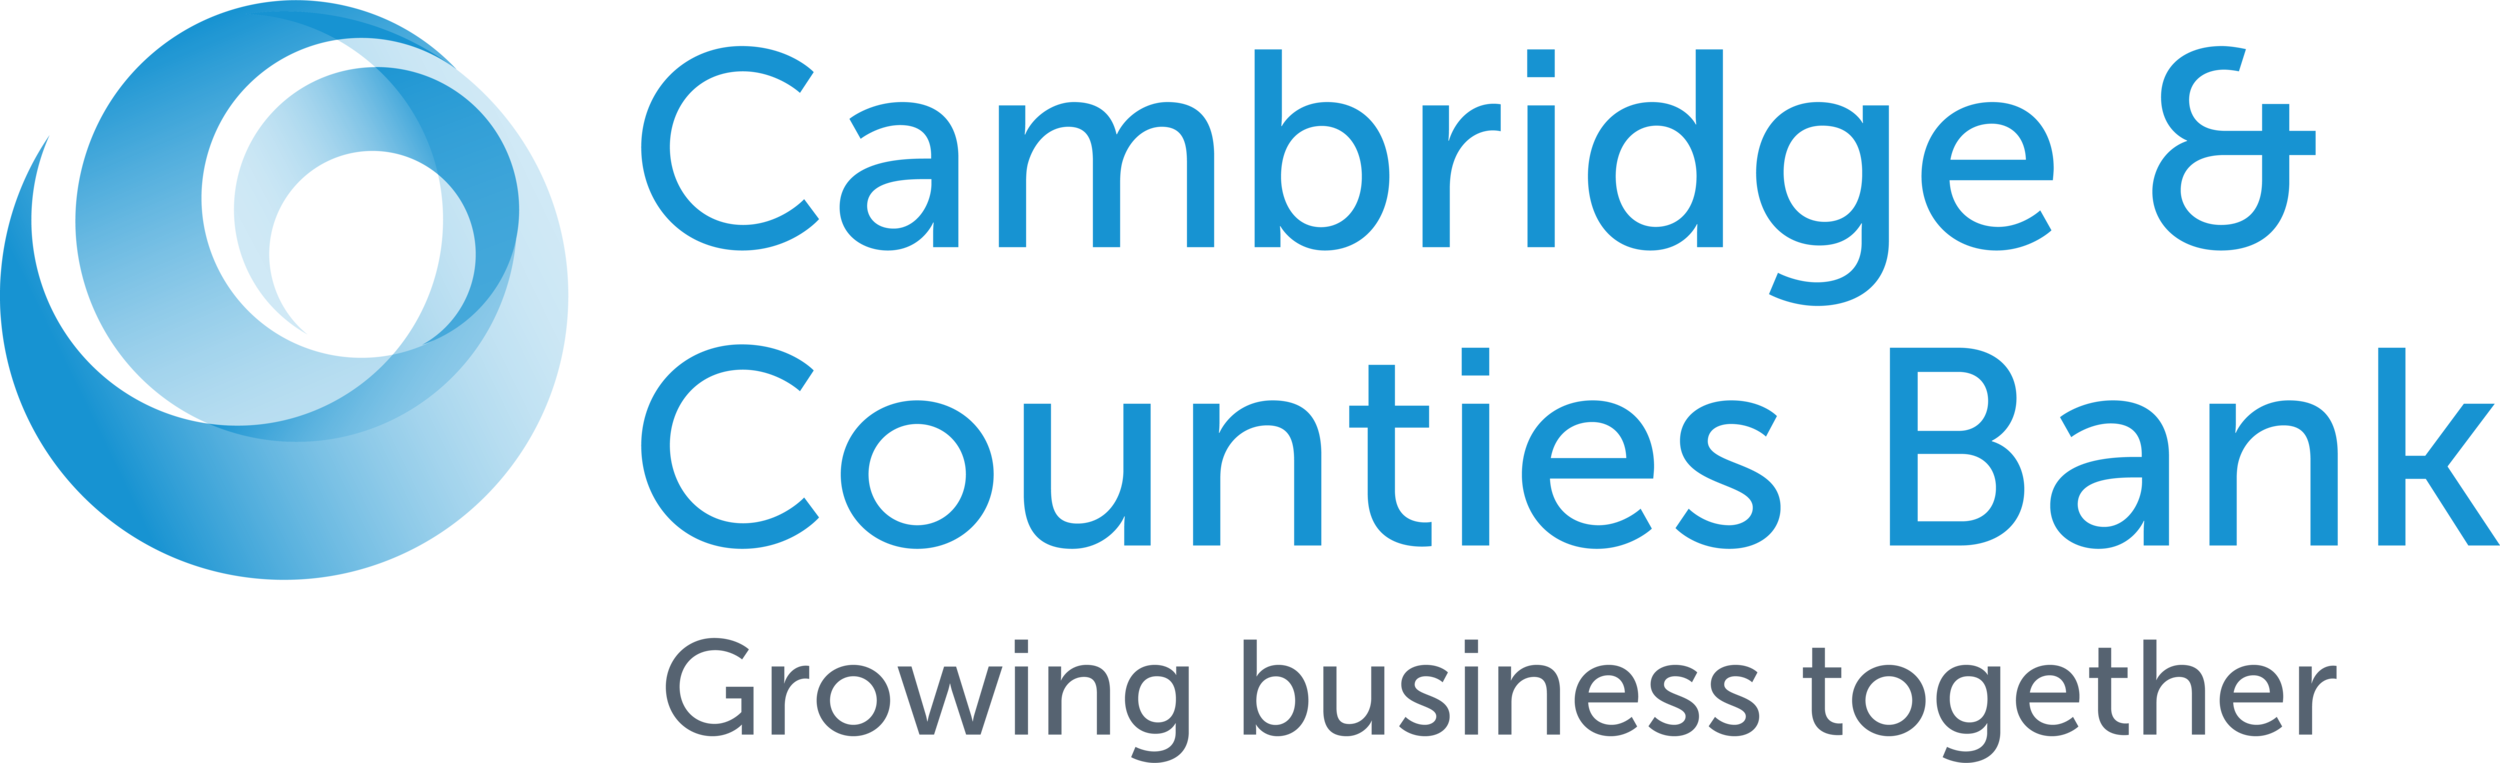 Cambridge and Counties Bank CMYK - LARGE.png